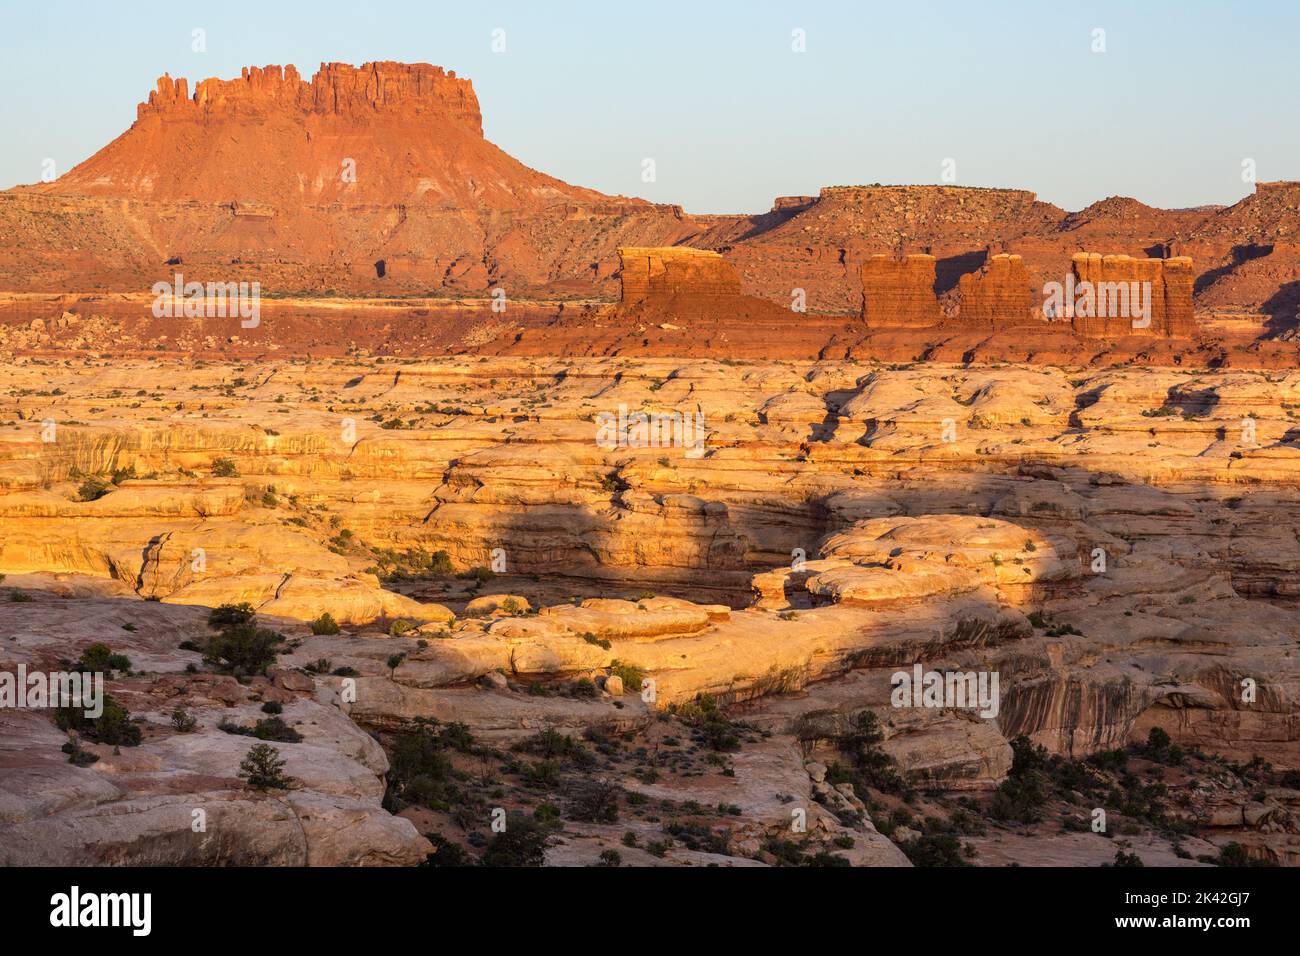 The Chocolate Drops & Elaterite Butte in the Land of Standing Rocks in the Maze District of Canyonlands National Park, Utah.  In the foreground is a m Stock Photo